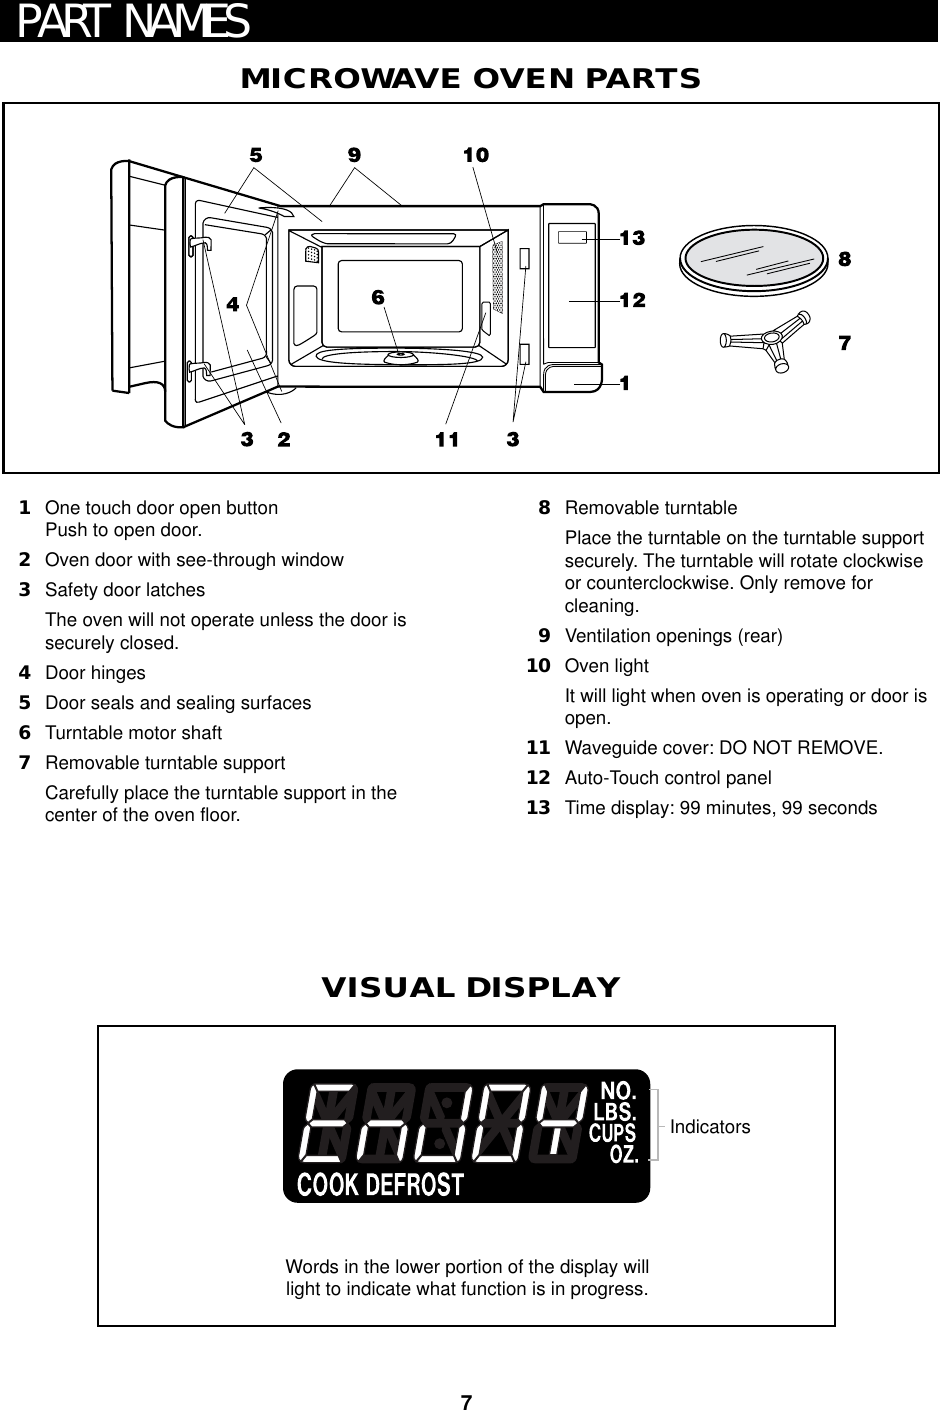 7PART NAMESMICROWAVE OVEN PARTS1One touch door open buttonPush to open door.2Oven door with see-through window3Safety door latchesThe oven will not operate unless the door issecurely closed.4Door hinges5Door seals and sealing surfaces6Turntable motor shaft7Removable turntable supportCarefully place the turntable support in thecenter of the oven floor.8Removable turntablePlace the turntable on the turntable supportsecurely. The turntable will rotate clockwiseor counterclockwise. Only remove forcleaning.9Ventilation openings (rear)10 Oven lightIt will light when oven is operating or door isopen.11 Waveguide cover: DO NOT REMOVE.12 Auto-Touch control panel13 Time display: 99 minutes, 99 secondsVISUAL DISPLAYWords in the lower portion of the display willlight to indicate what function is in progress.Indicators